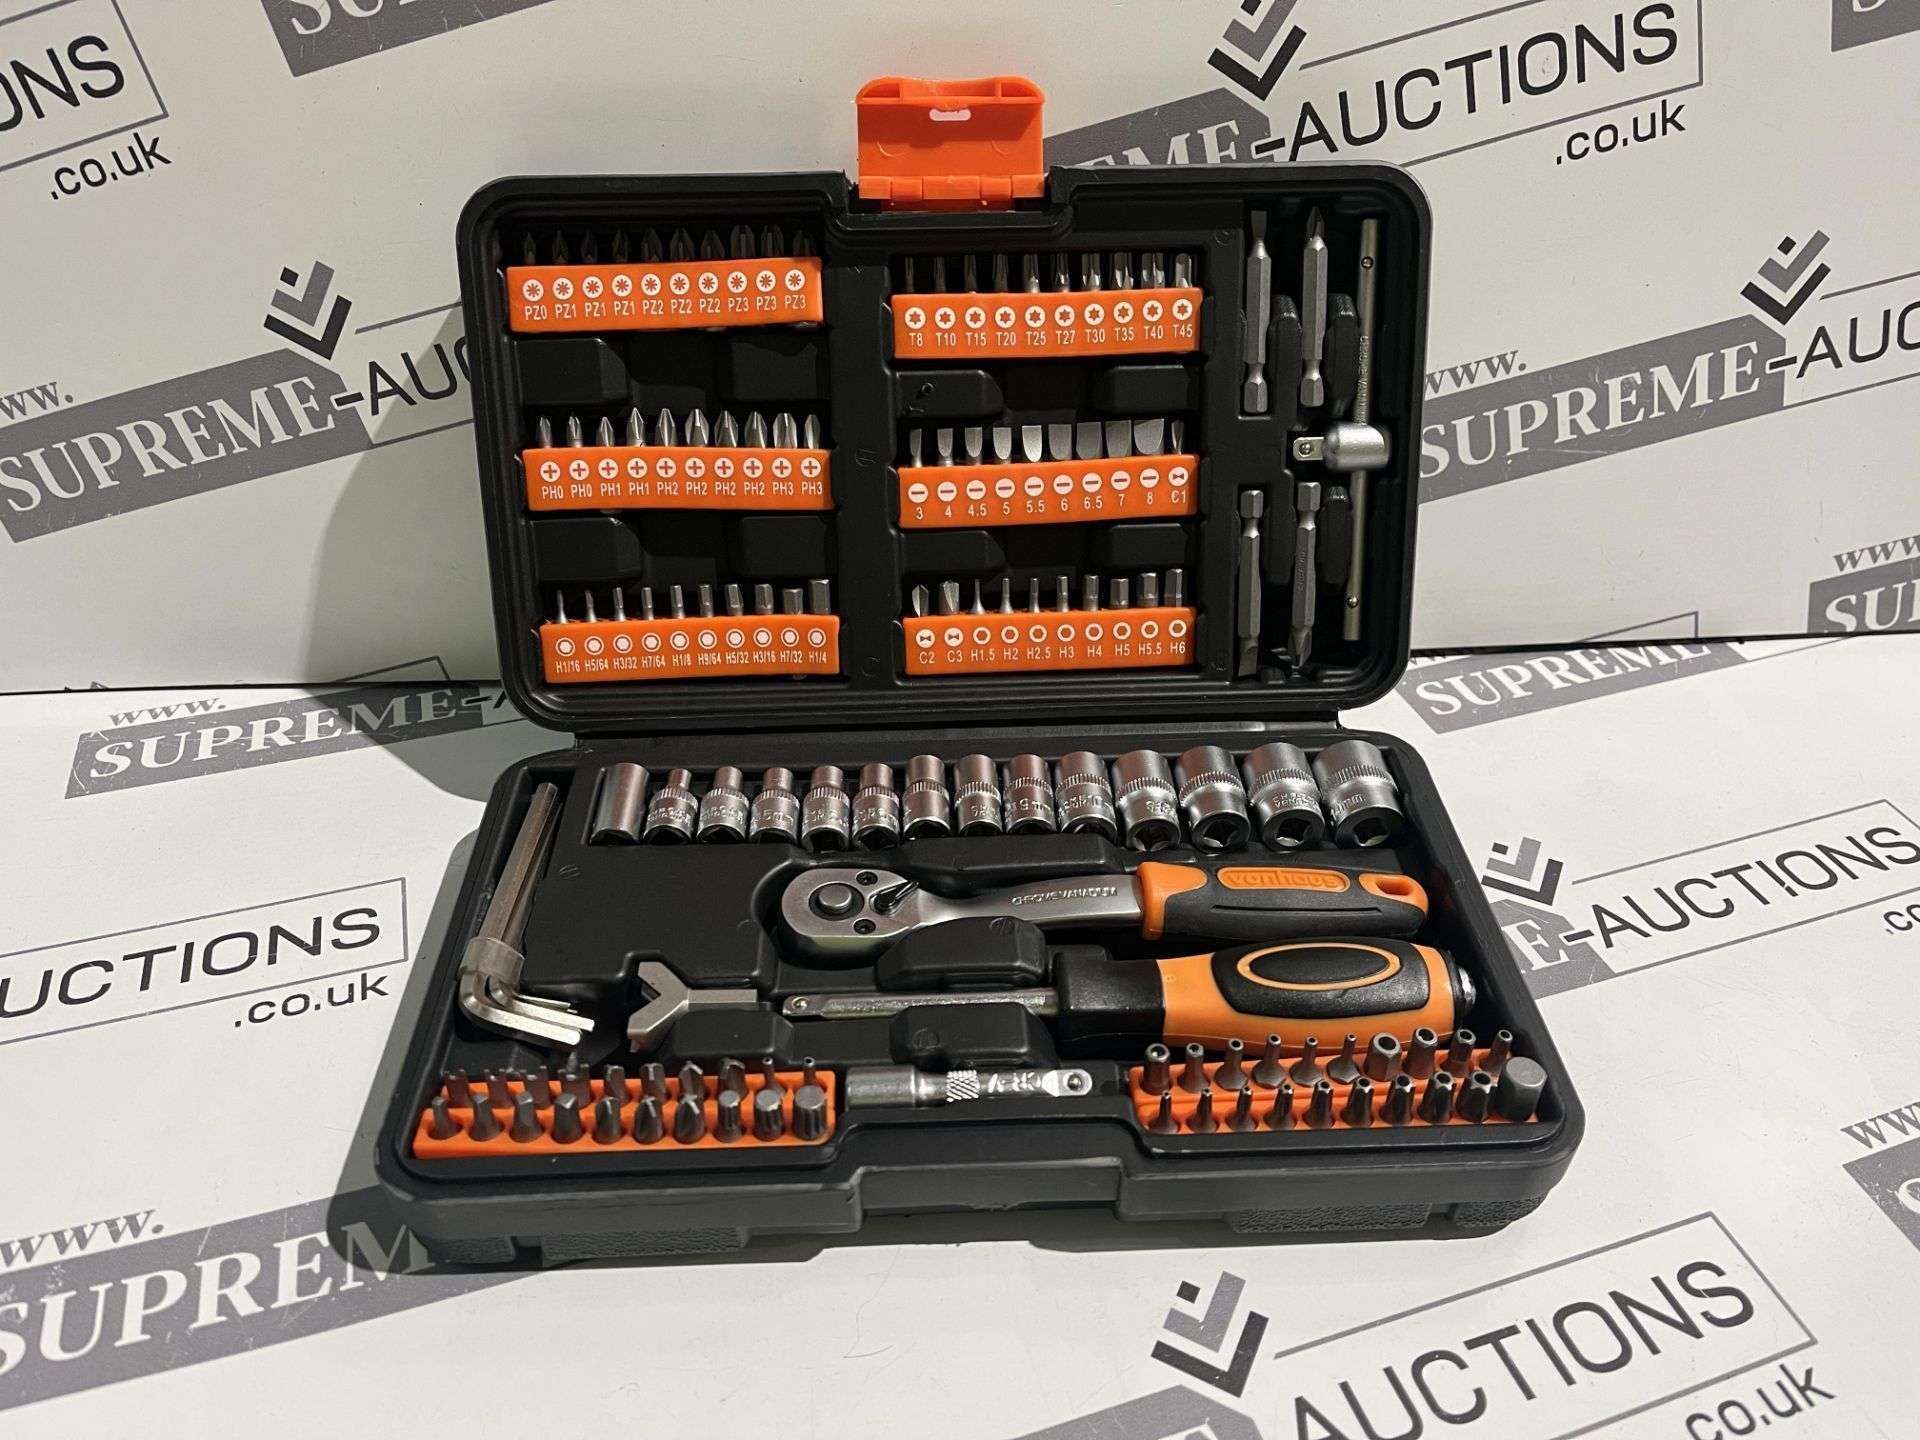 2x BRAND NEW 130 PIECE SOCKET & BIT TOOL SETS. (R5-7). Be prepared for the unexpected with the